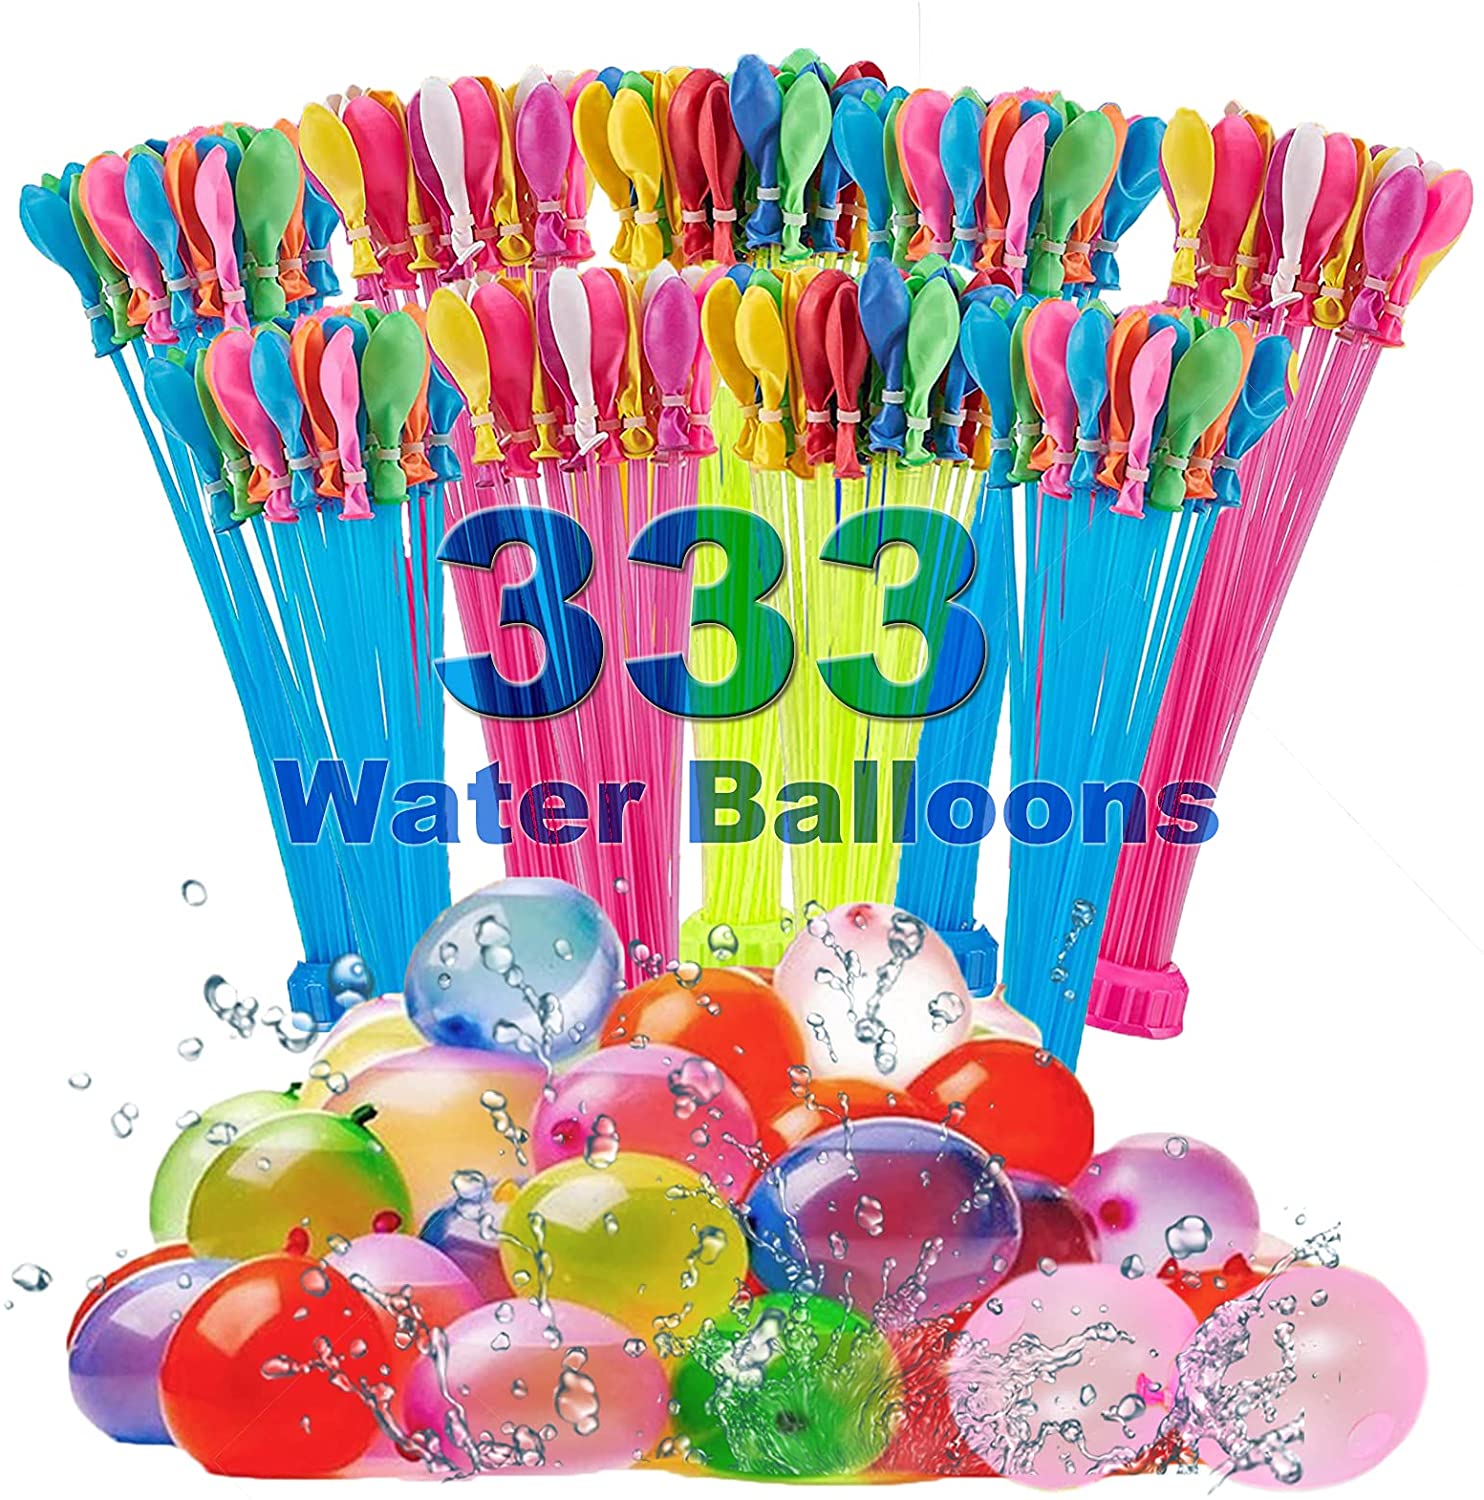 Family Made Company Water Balloons for Kids Boys & Girls Adults Party Easy Quick Summer Splash Fun Outdoor Backyard with 12 Pack 444 Balloons a ORz 